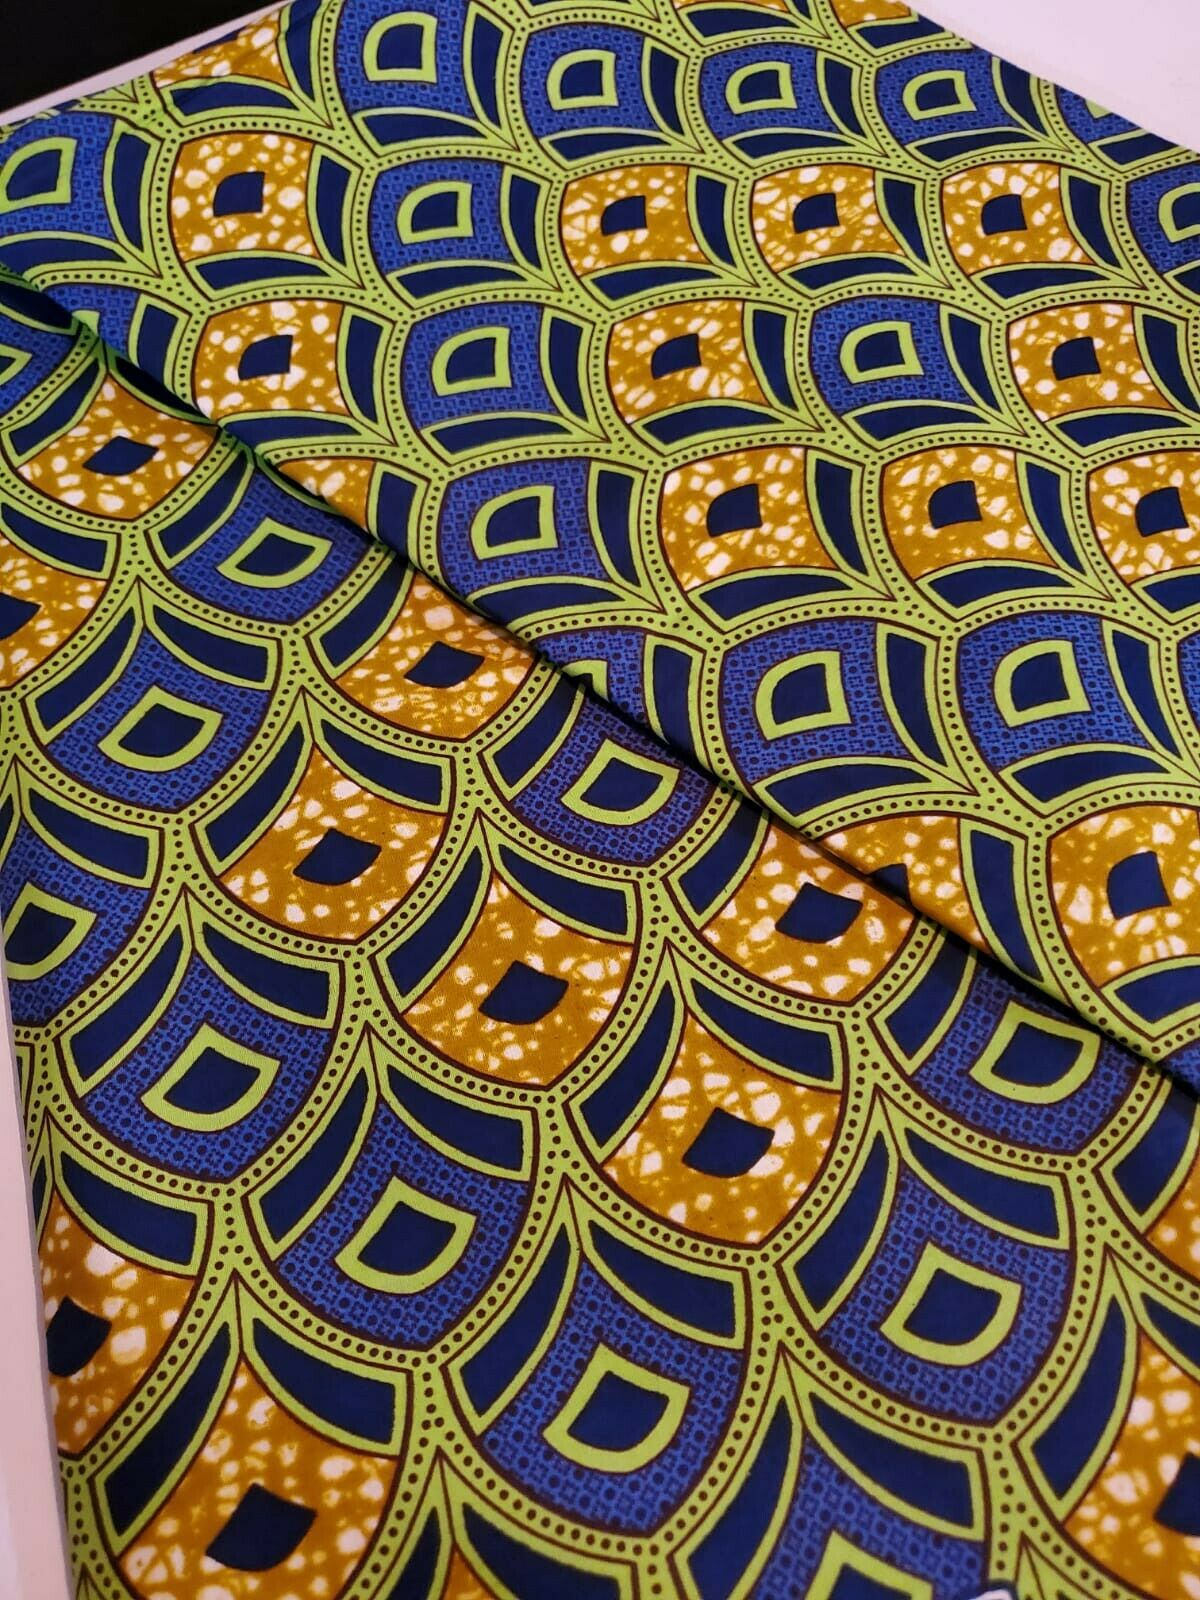 Green MultiAfrican Print 100% Cotton Fabric ~6yards×46"~$32 SALE $25!!!!